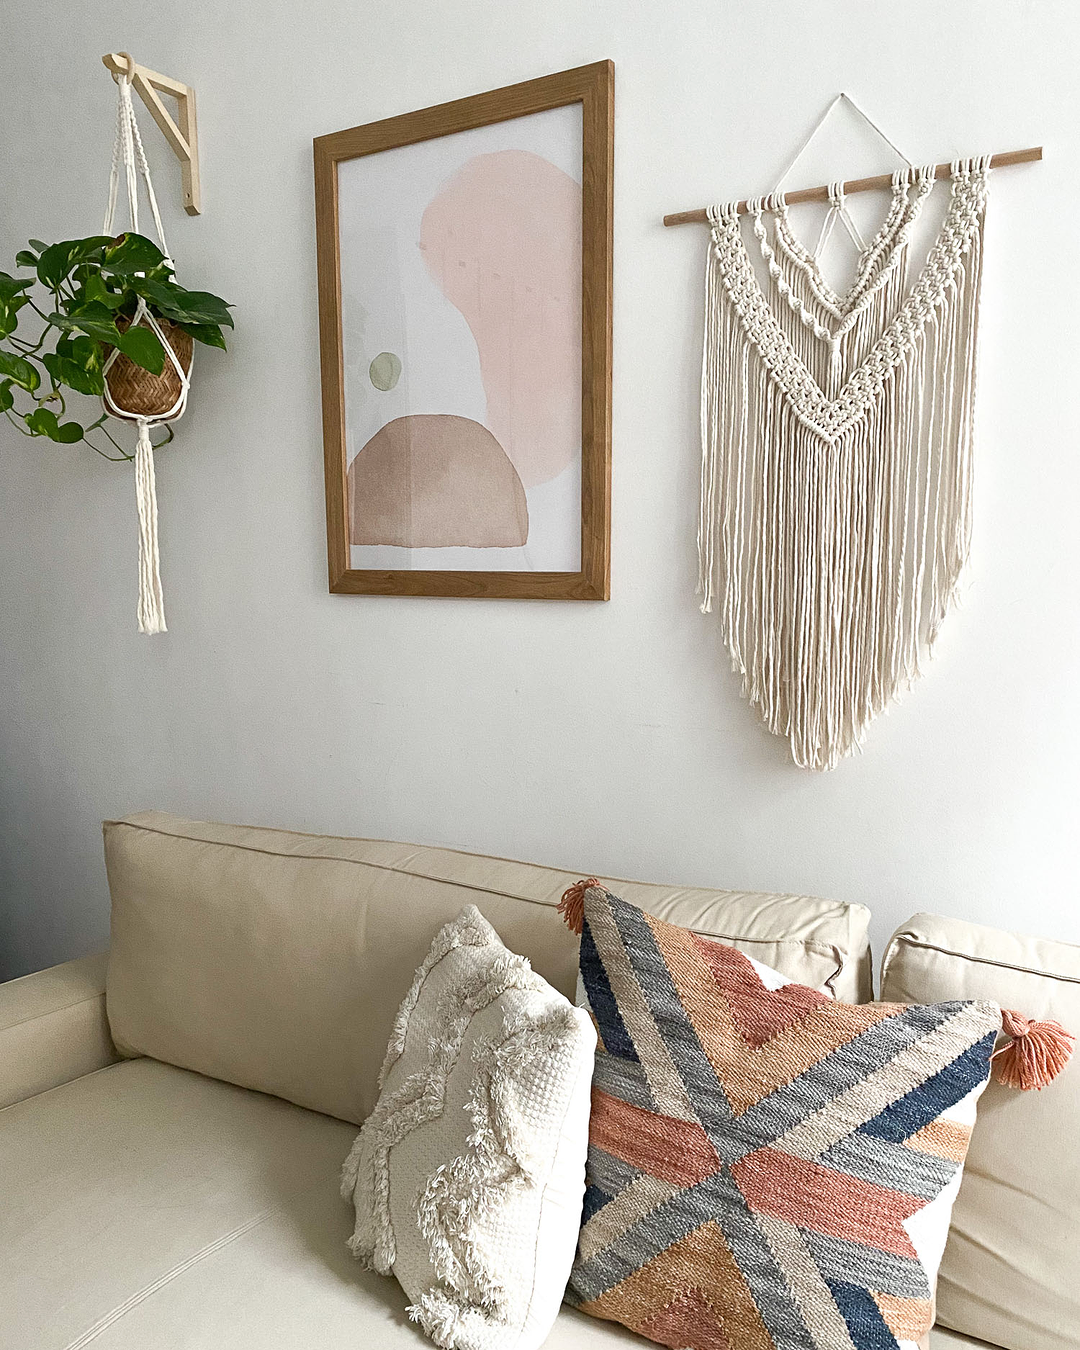 macrame wall hanging styled on a living room wall above a sofa and next to a framed wall art to add a bohemian look to the space